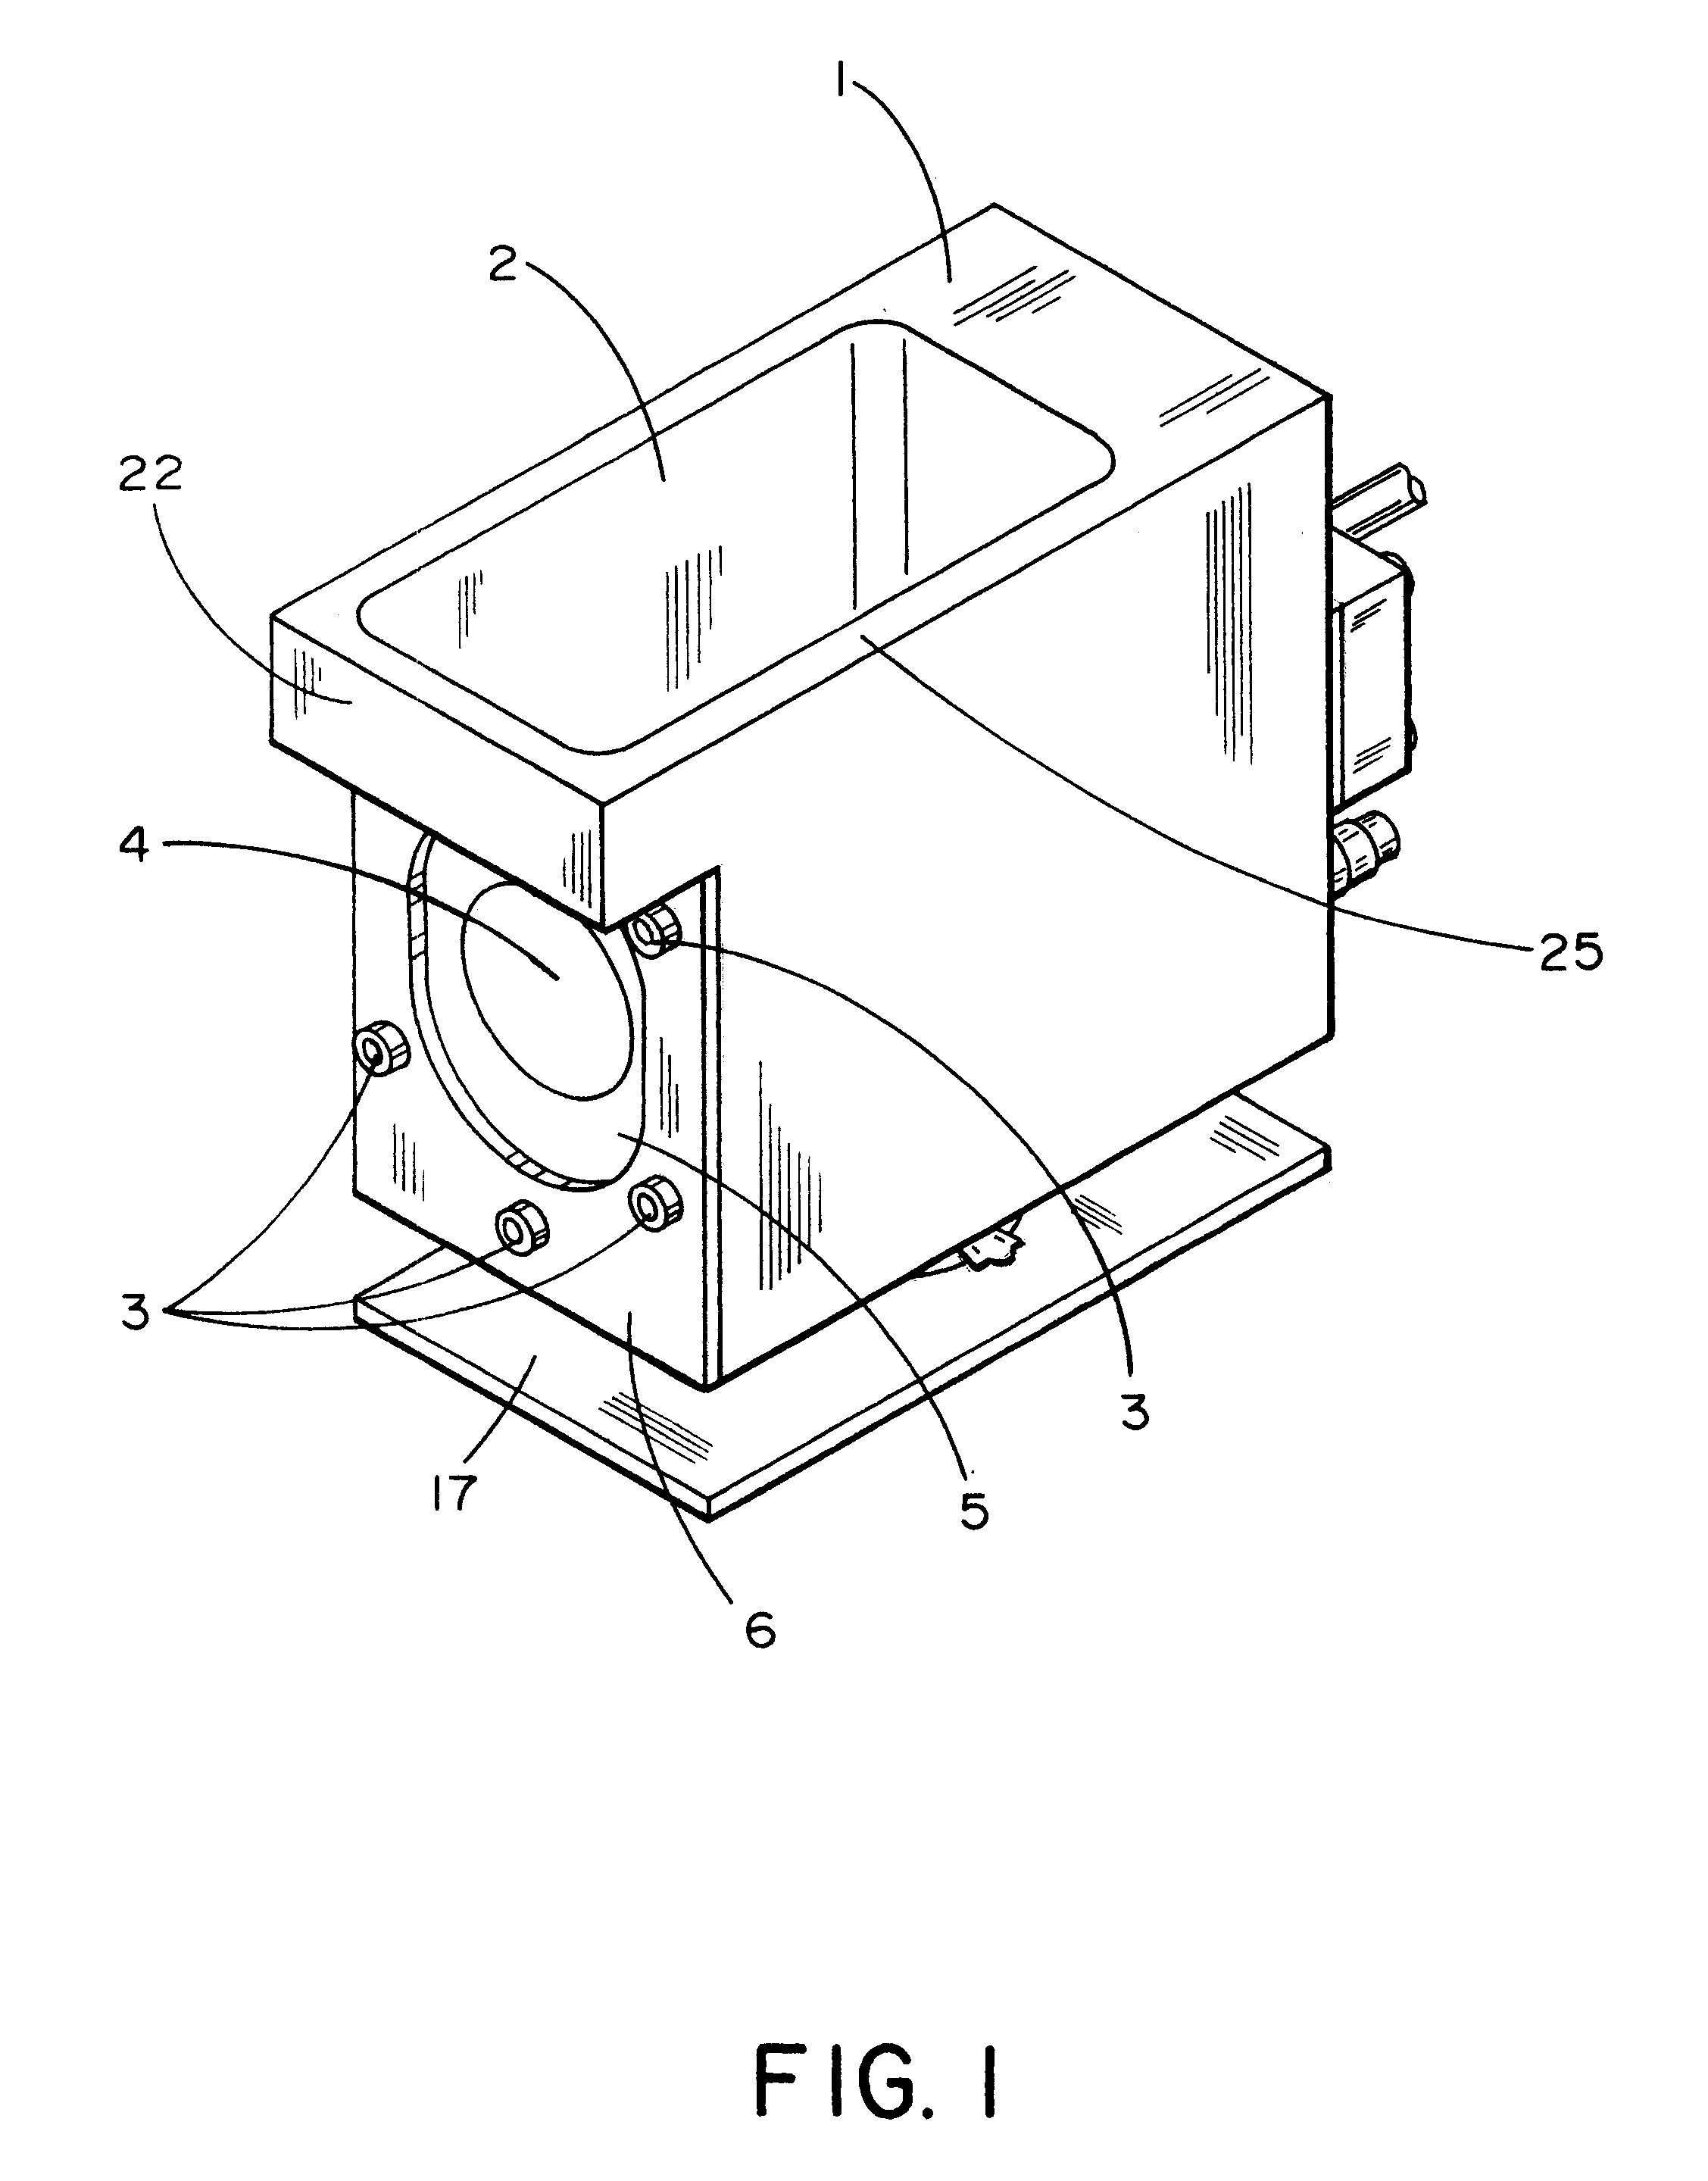 Humidity chamber for scanning stylus atomic force microscope with cantilever tracking